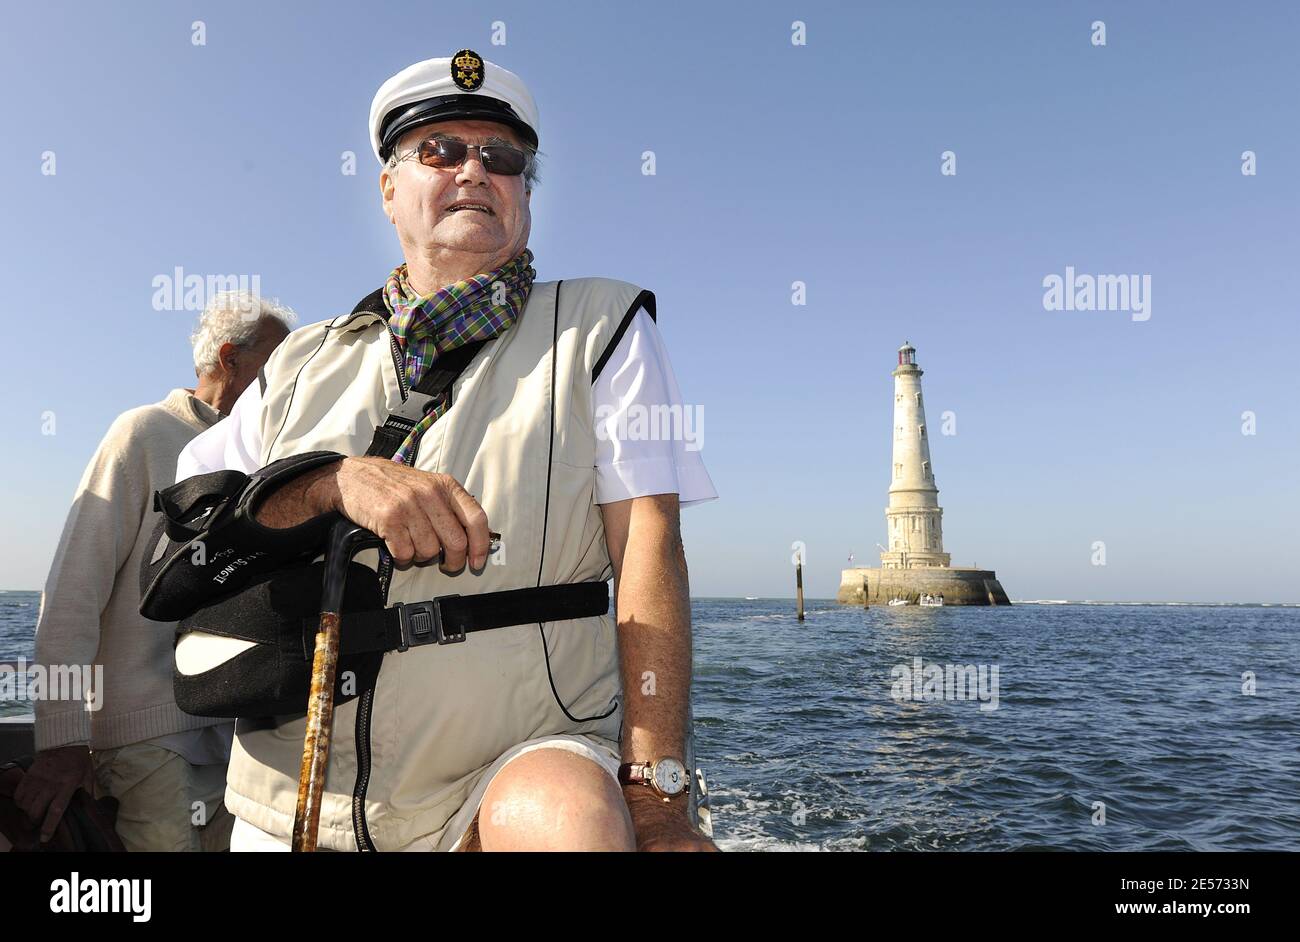 EXCLUSIVE. Denmark's Prince Henrik aboard royal yacht 'Dennebrog' after his  visit to Cordouan Lighthouse (in the background), off Royan, western France  on August 27, 2008. Cordouan is the oldest lighthouse in France,